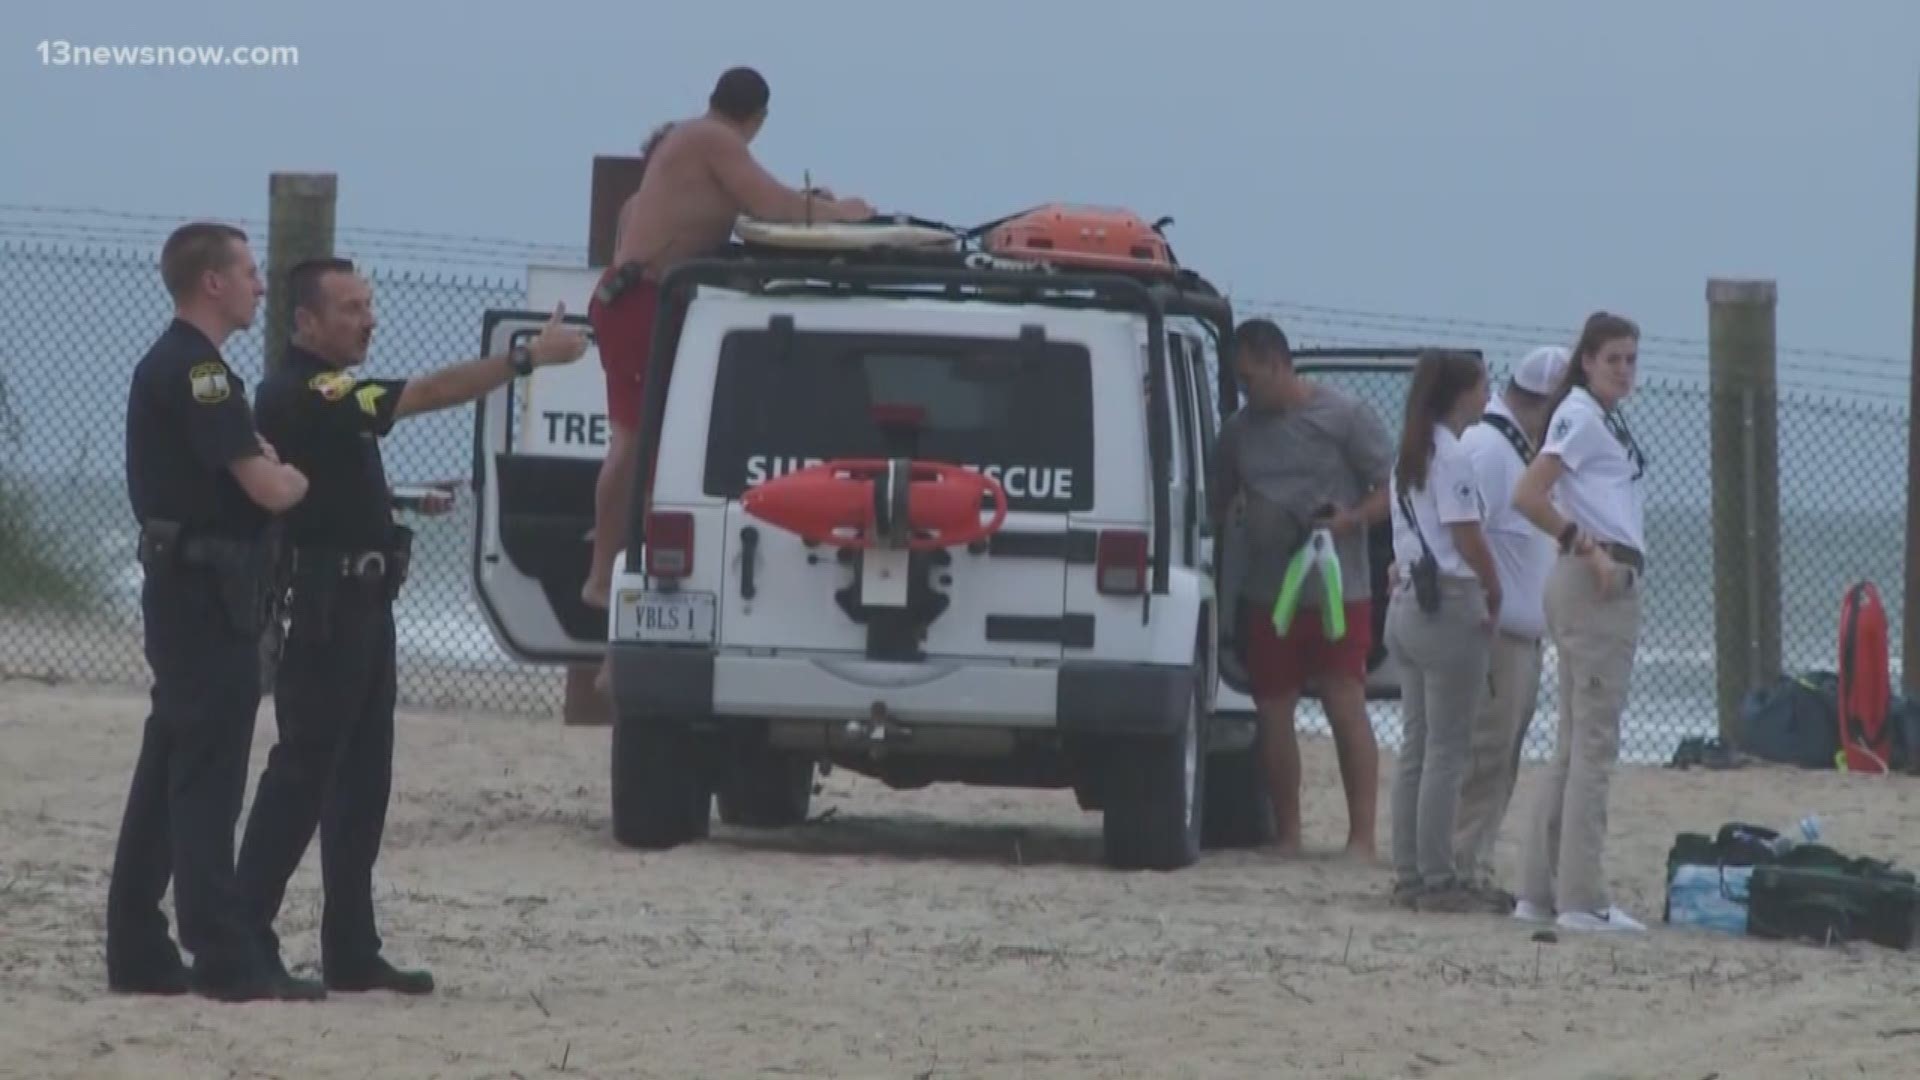 13News Now Chenue Her was at the demonstration the Coast Guard gave swimmers and beachgoers about how to spot rip currents and escape them if you're caught in them.